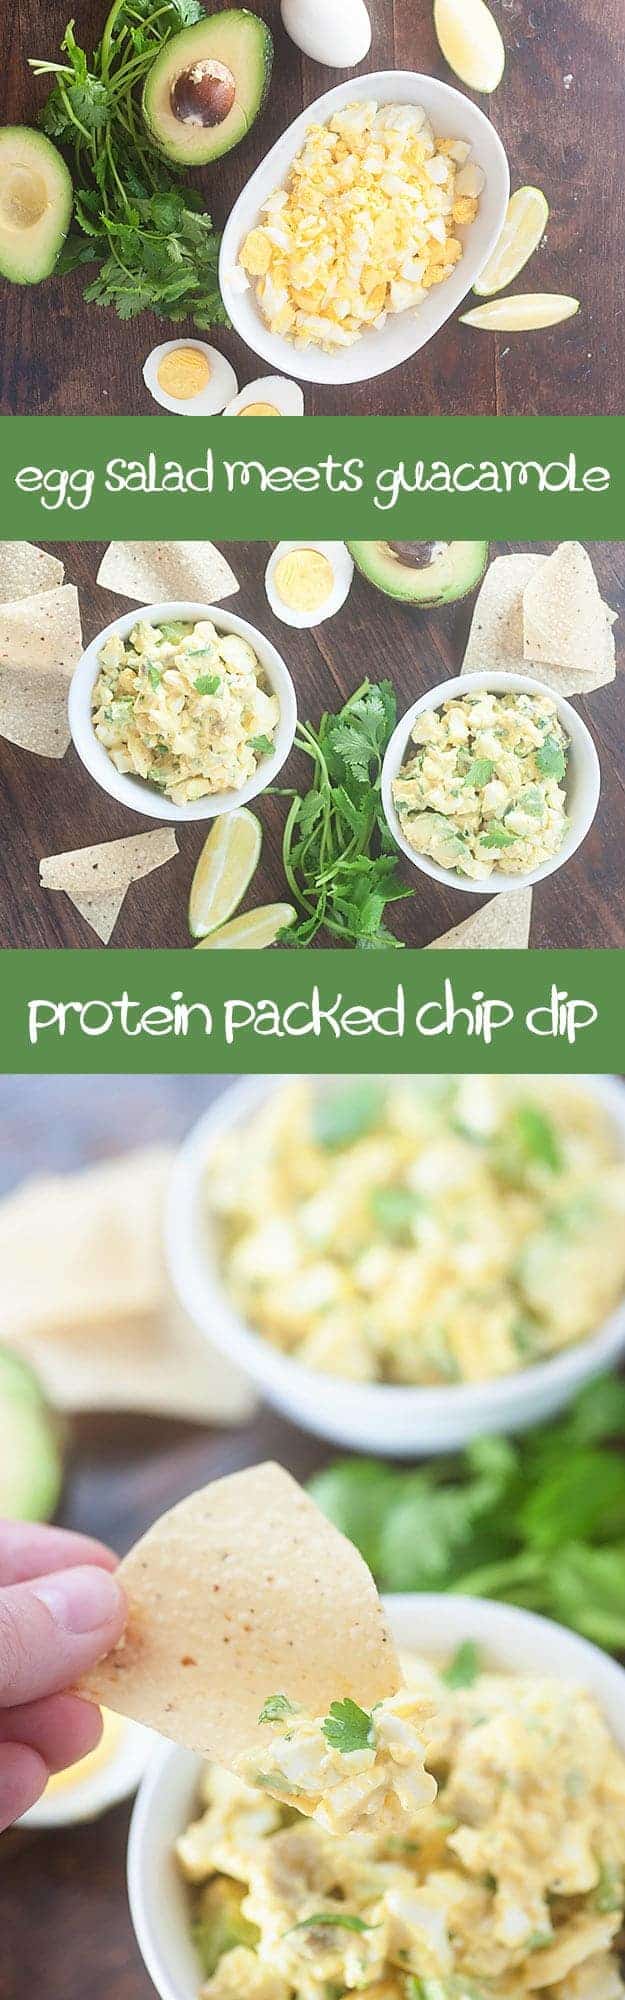 Guacamole meets egg salad in this protein packed chip dip that's bursting with Mexican flavors!